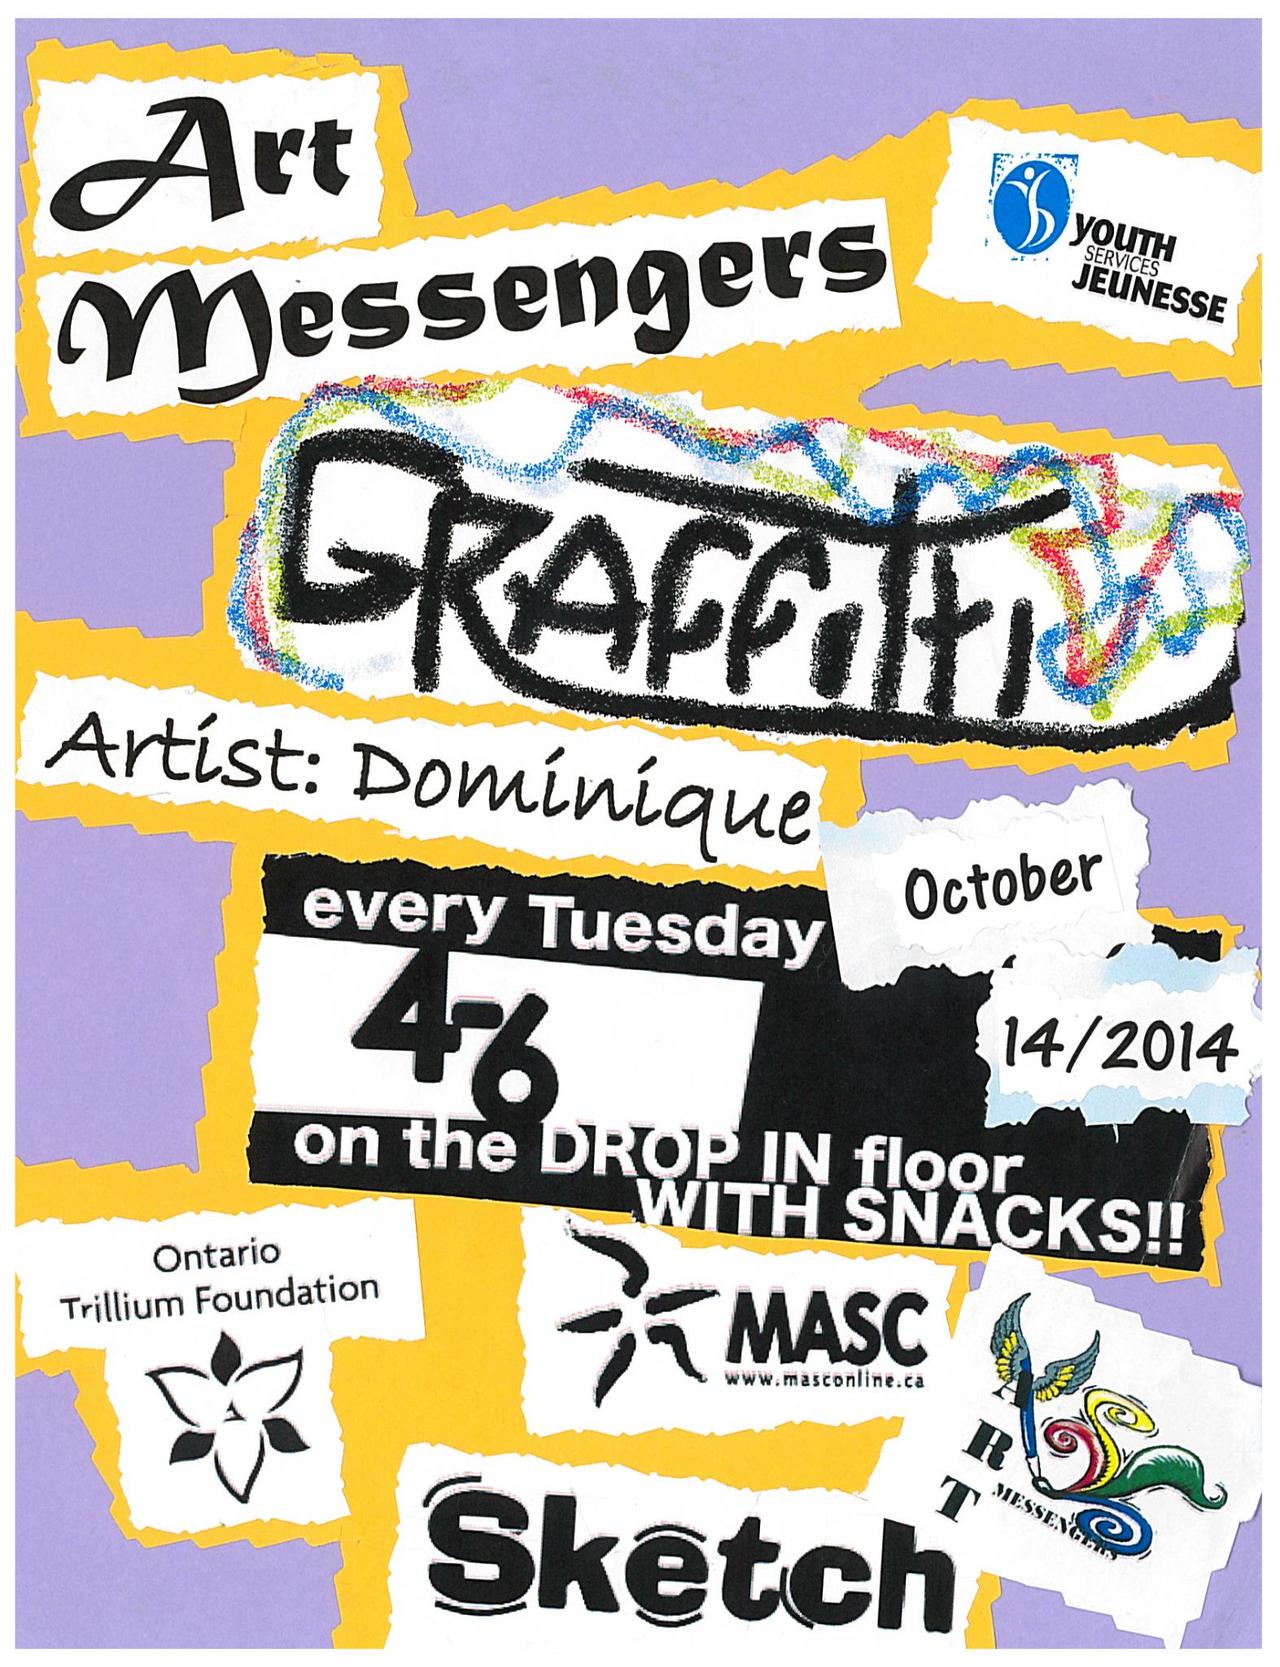 Check it out, #Graffiti Live today at YSB's Downtown Drop-in with @YSBArtMessenger! Join us 4-6 #Ottawa #youth #art http://t.co/oBJuHmbdCR